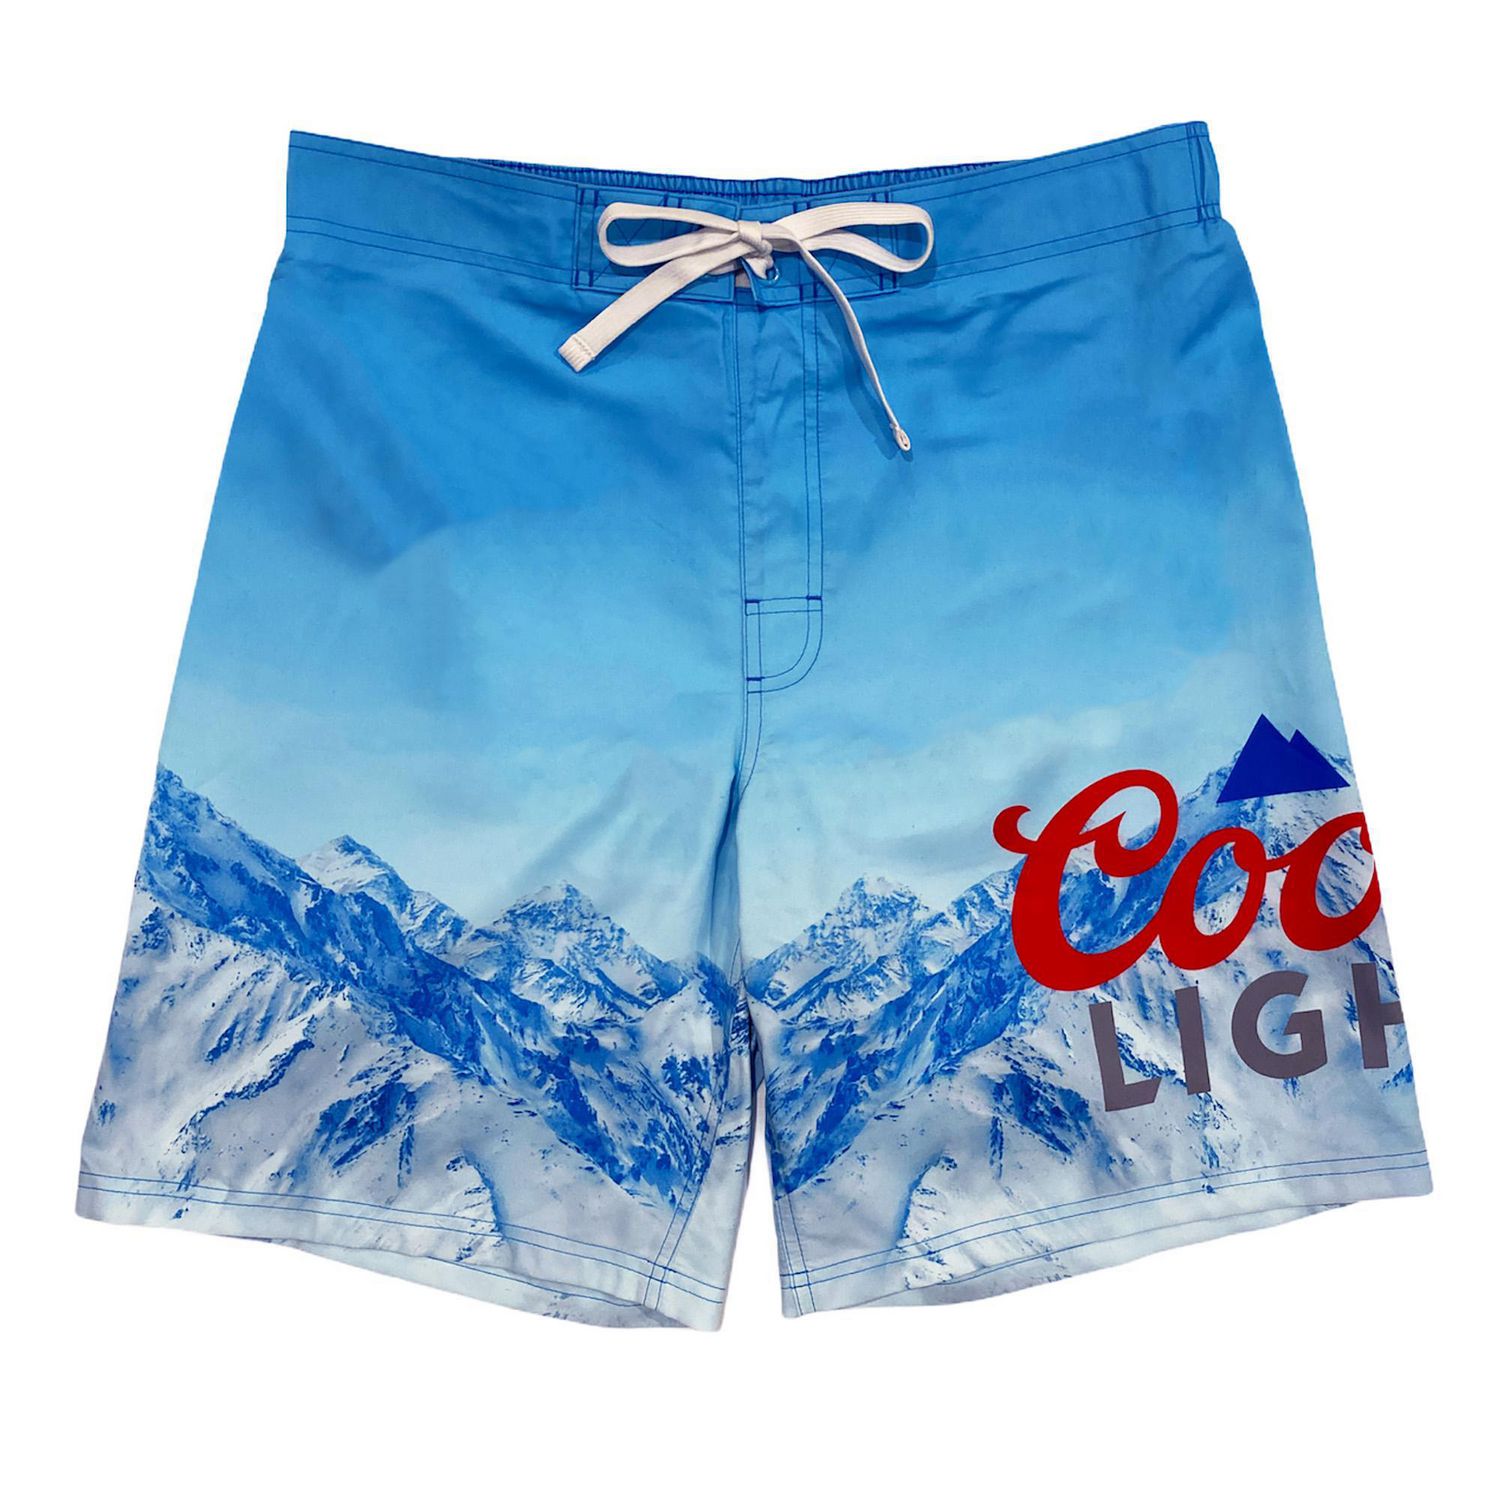 Coors Light Bathing Suit - www.inf-inet.com